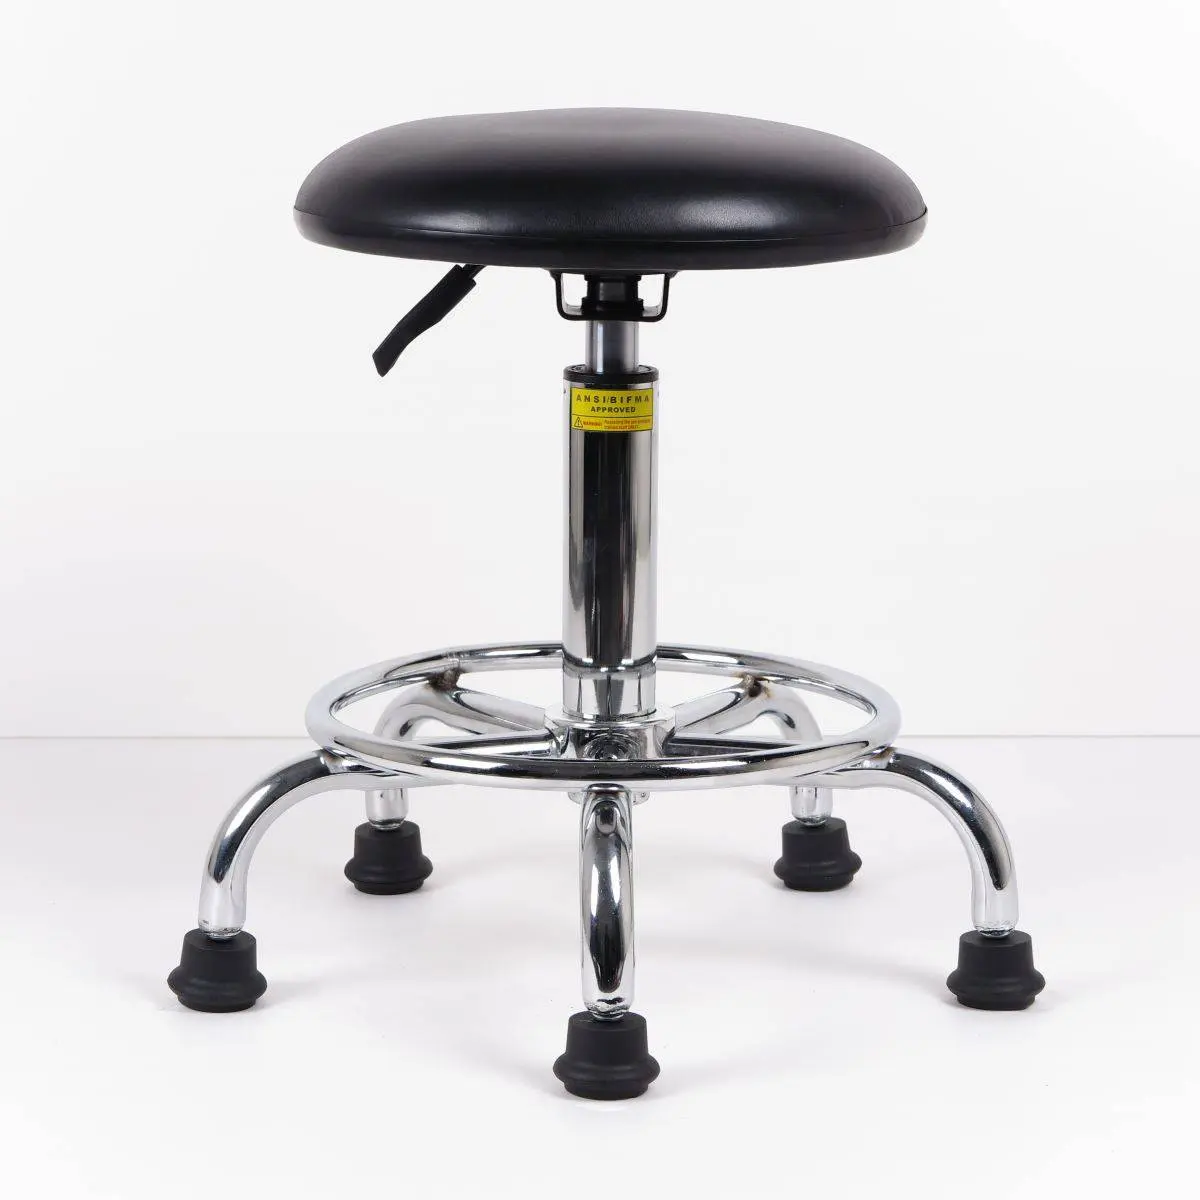 sigmaforce esd small stool for lab hospital factory workshop navy